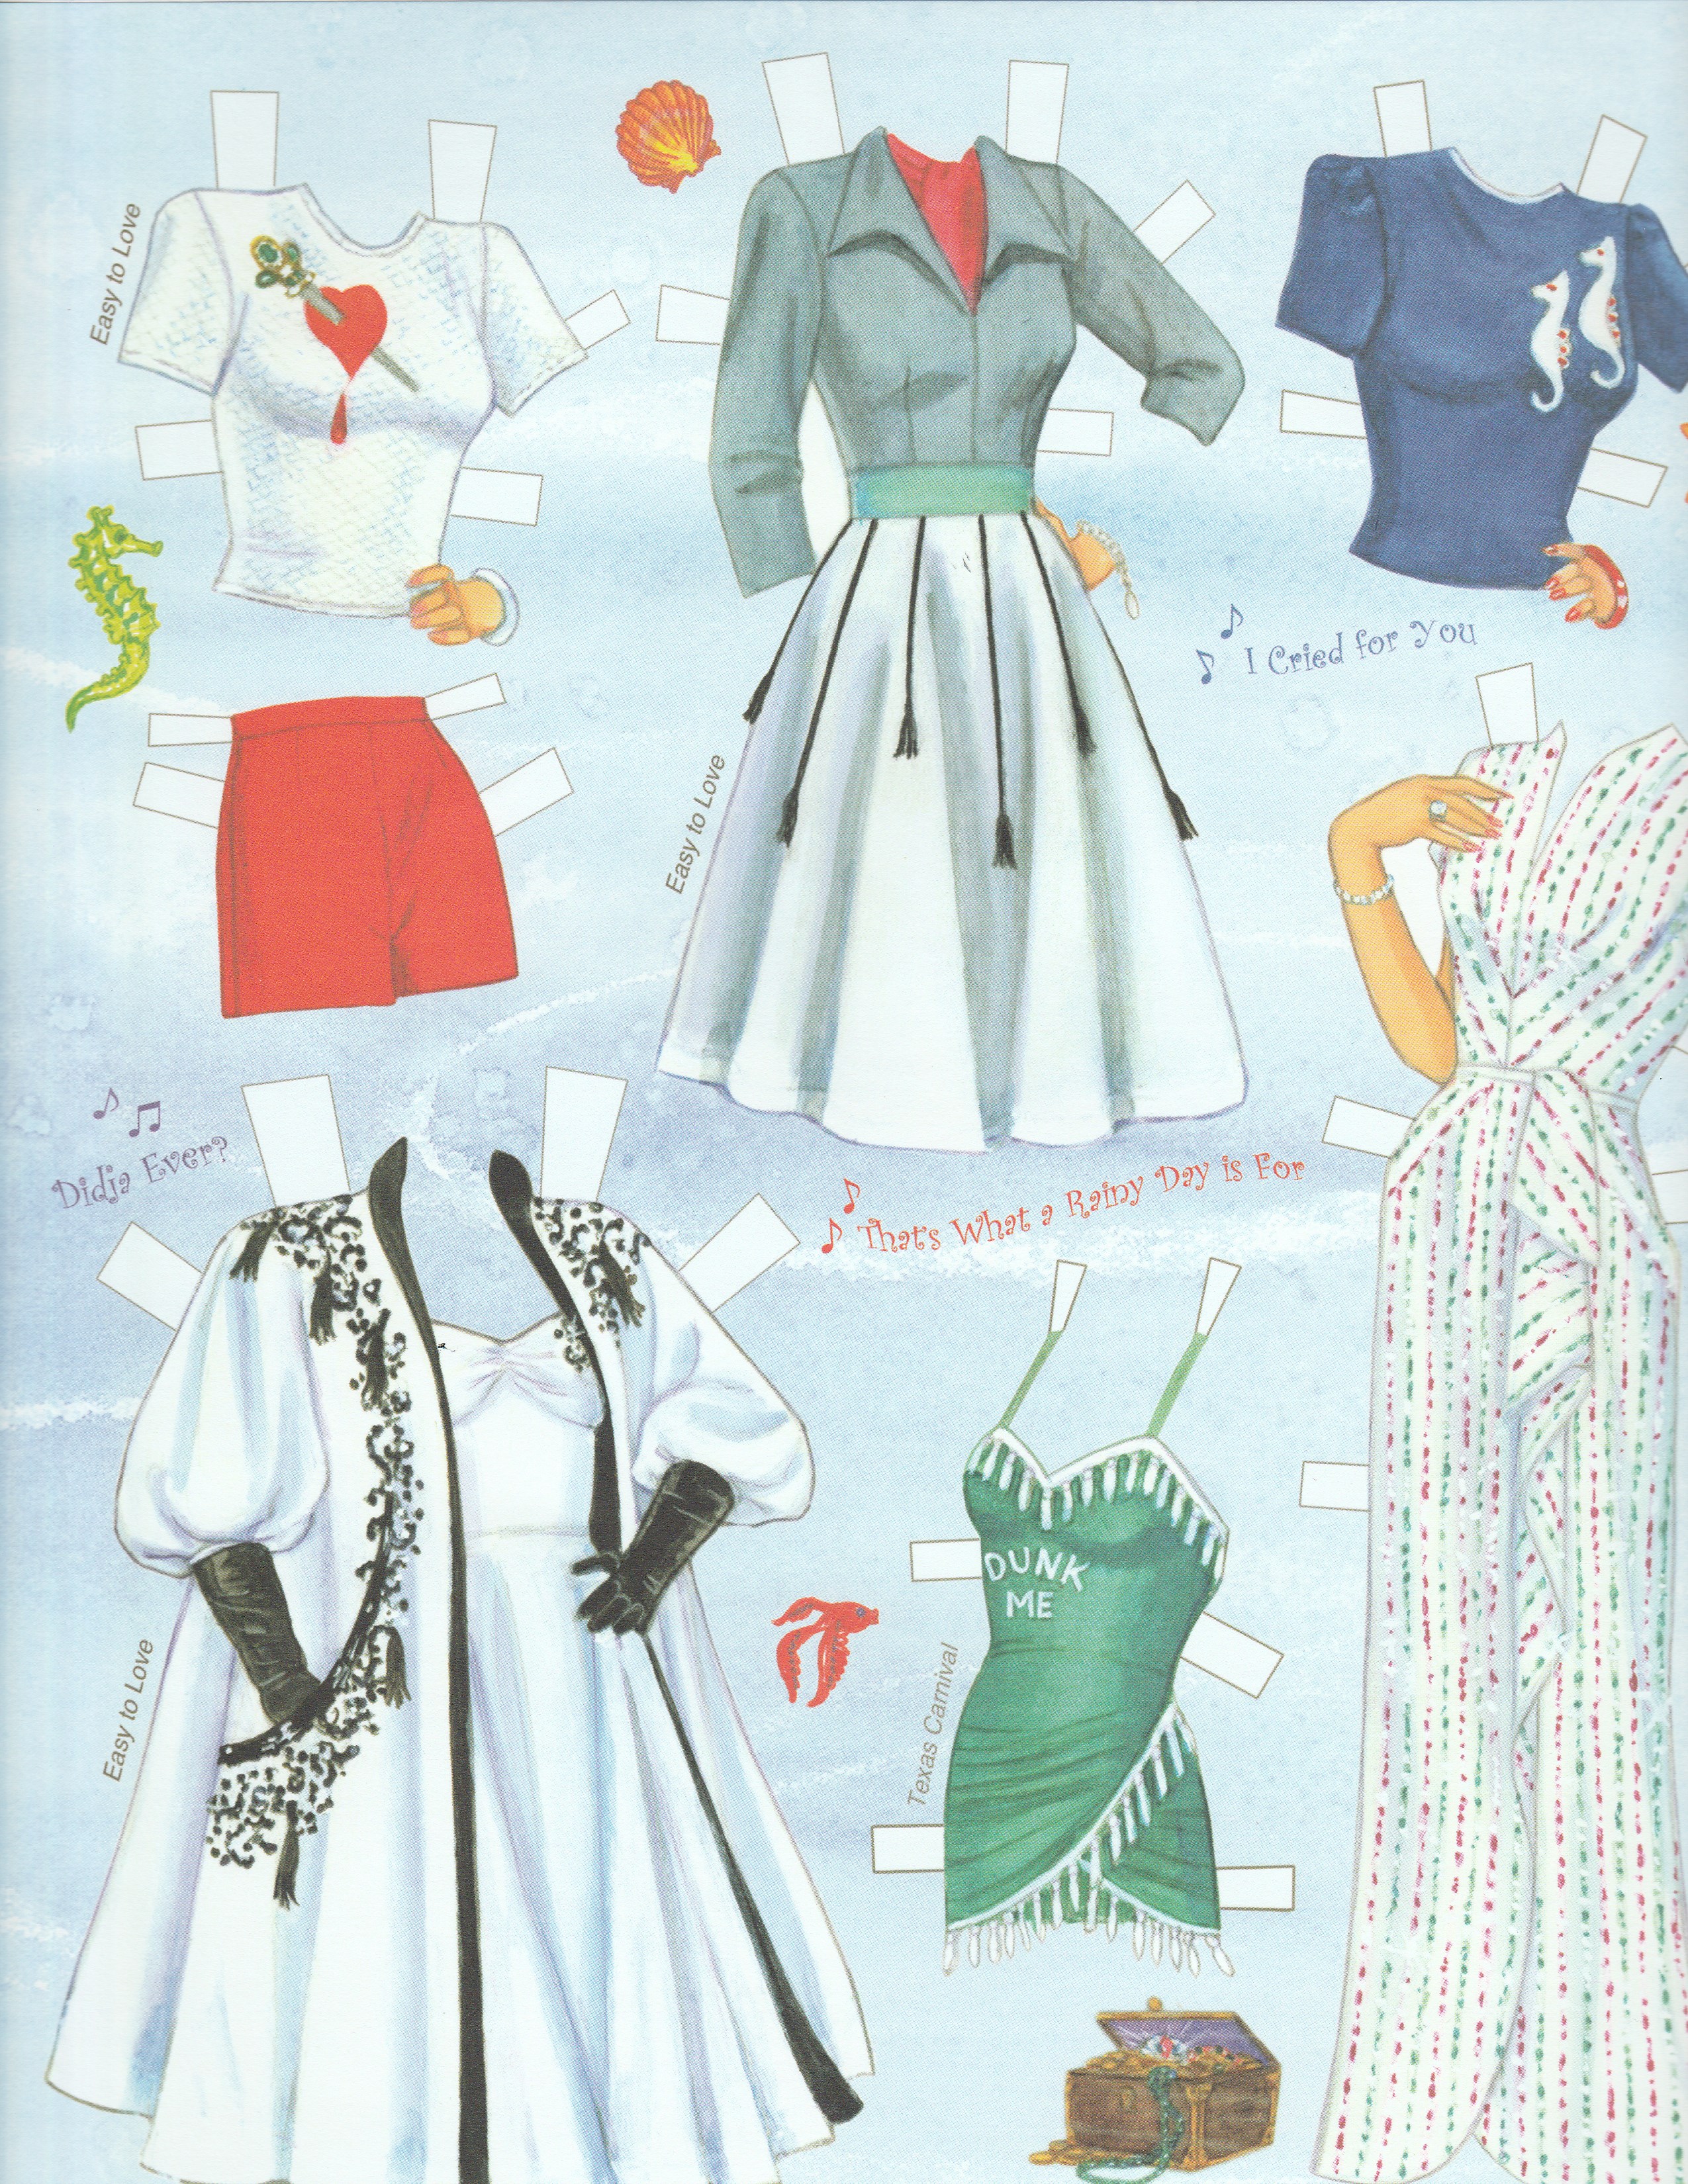 where to buy paper dolls